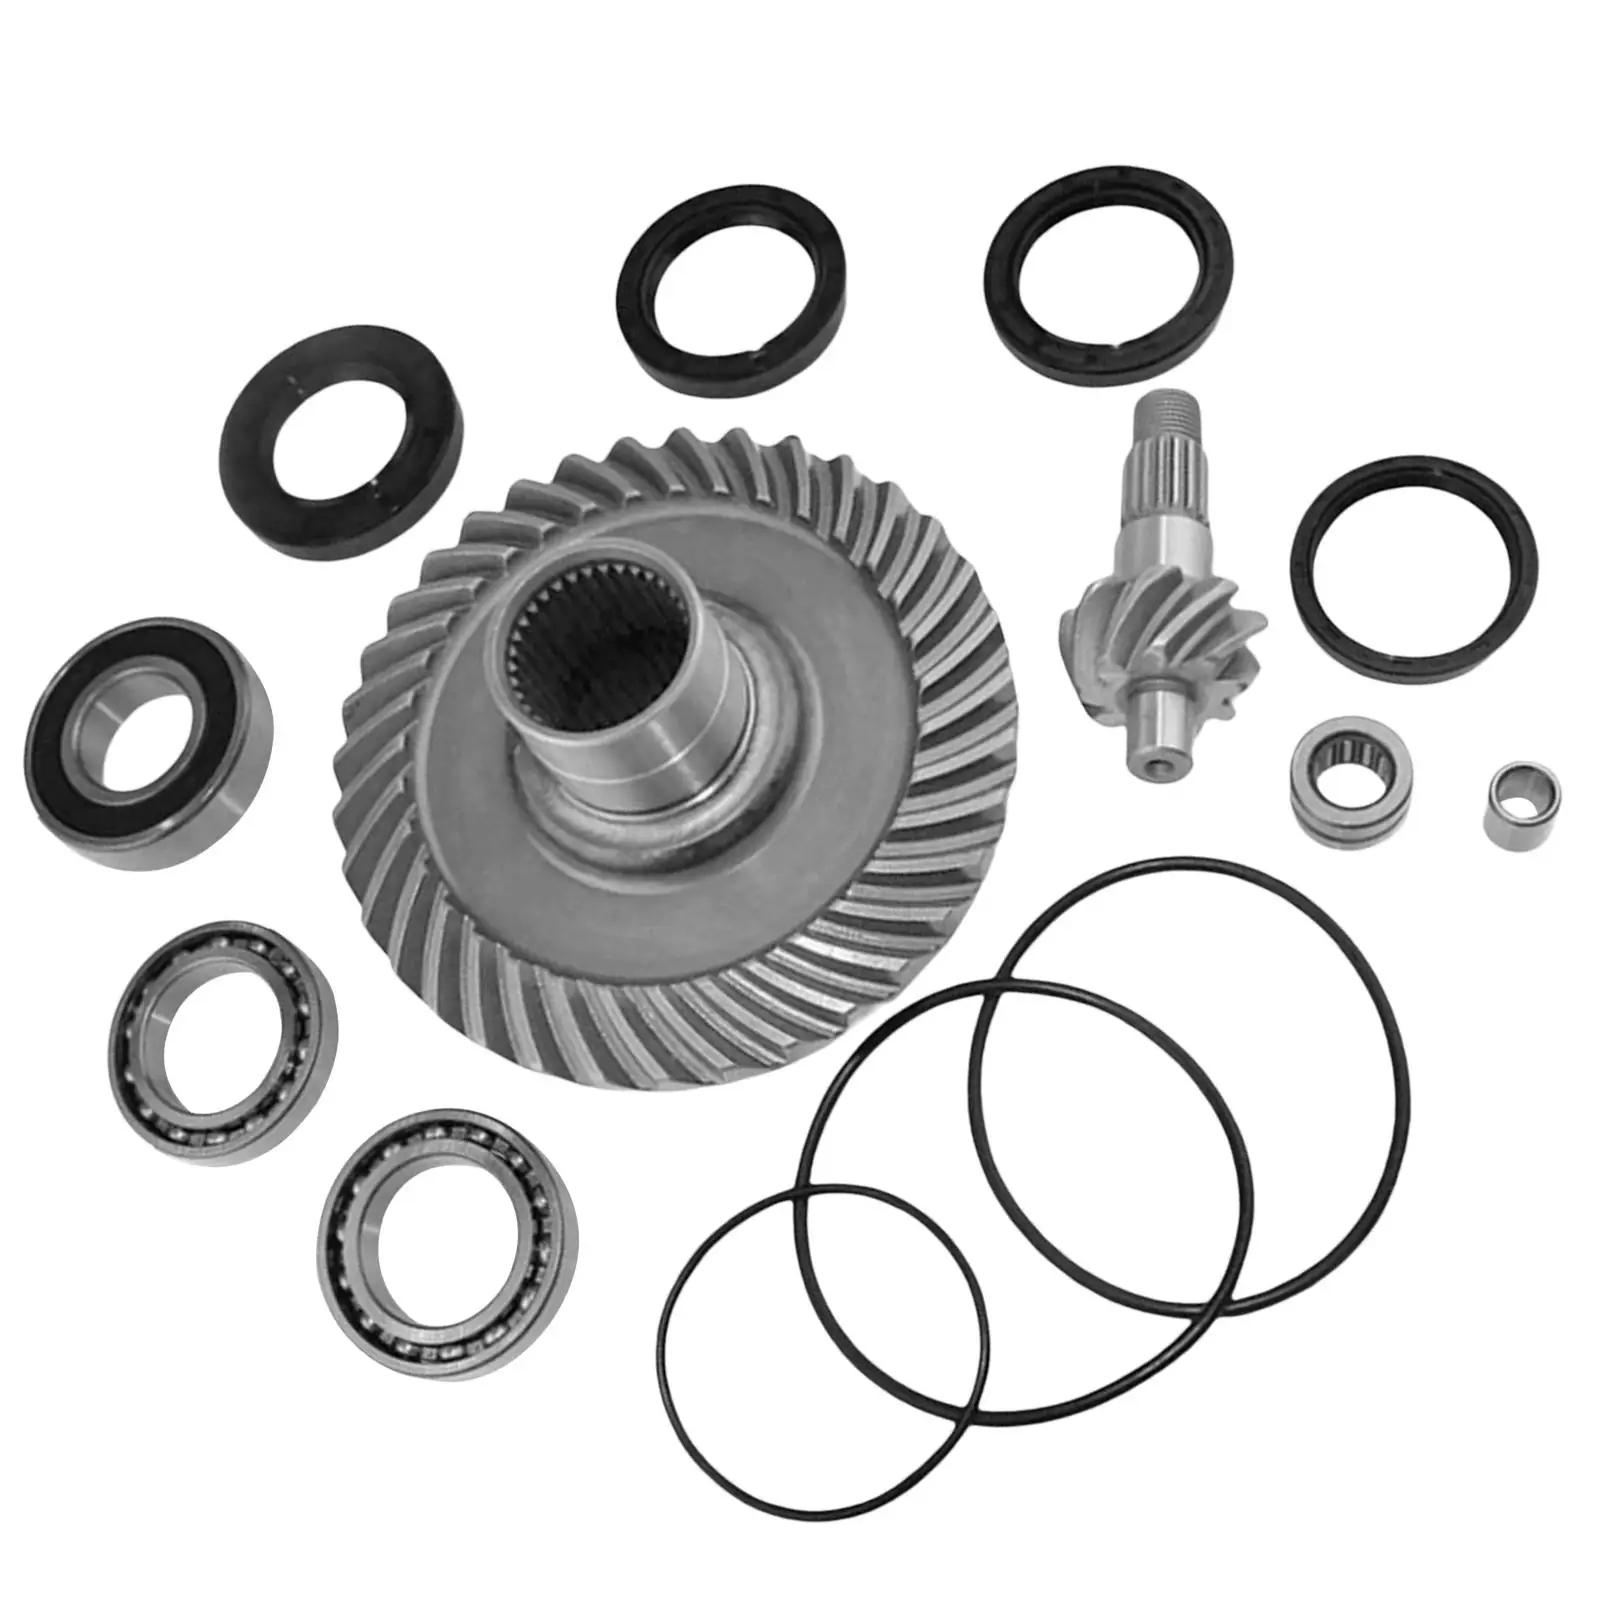 Rear Differential Ring & Pinion Gear + Bearing Kit 14Pcs/Set for Honda TRX300 88-00 Replacement Easy to Install Accessories